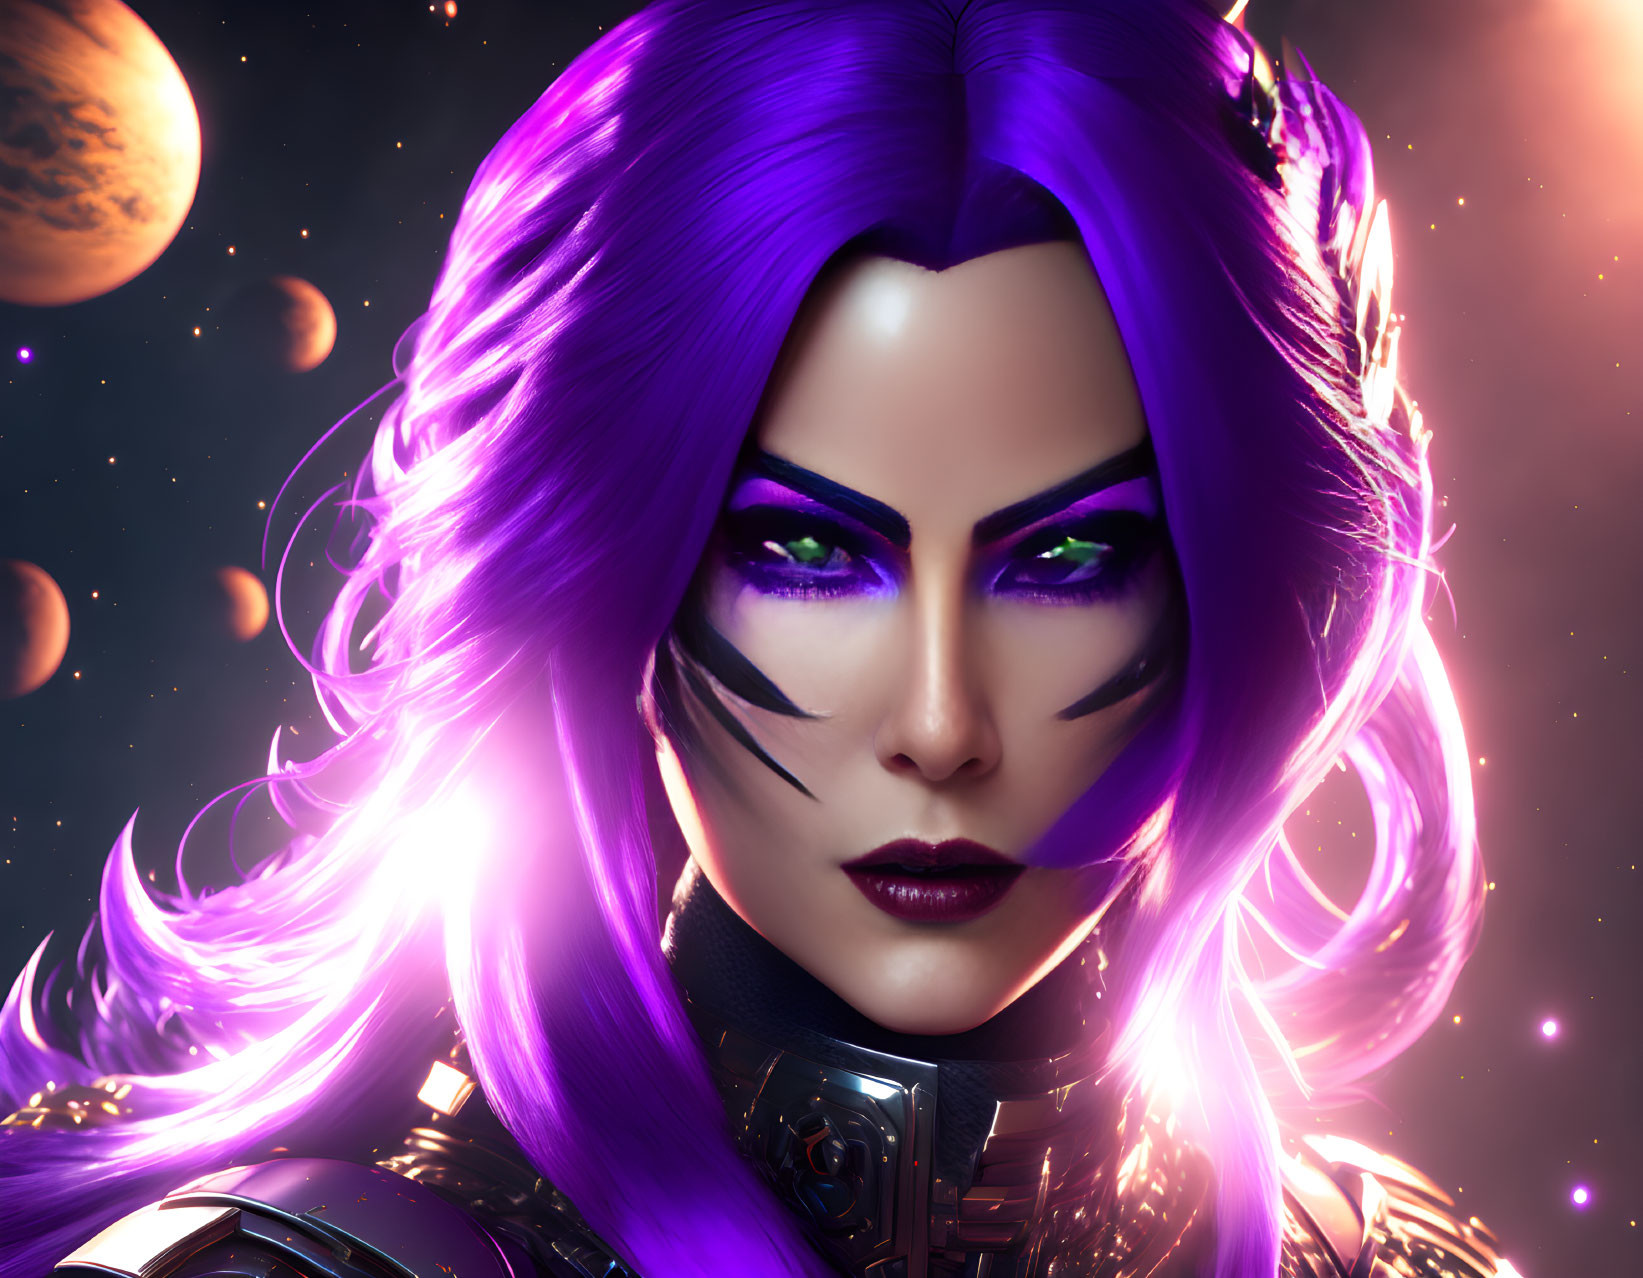 Purple-haired female character in futuristic armor against cosmic backdrop